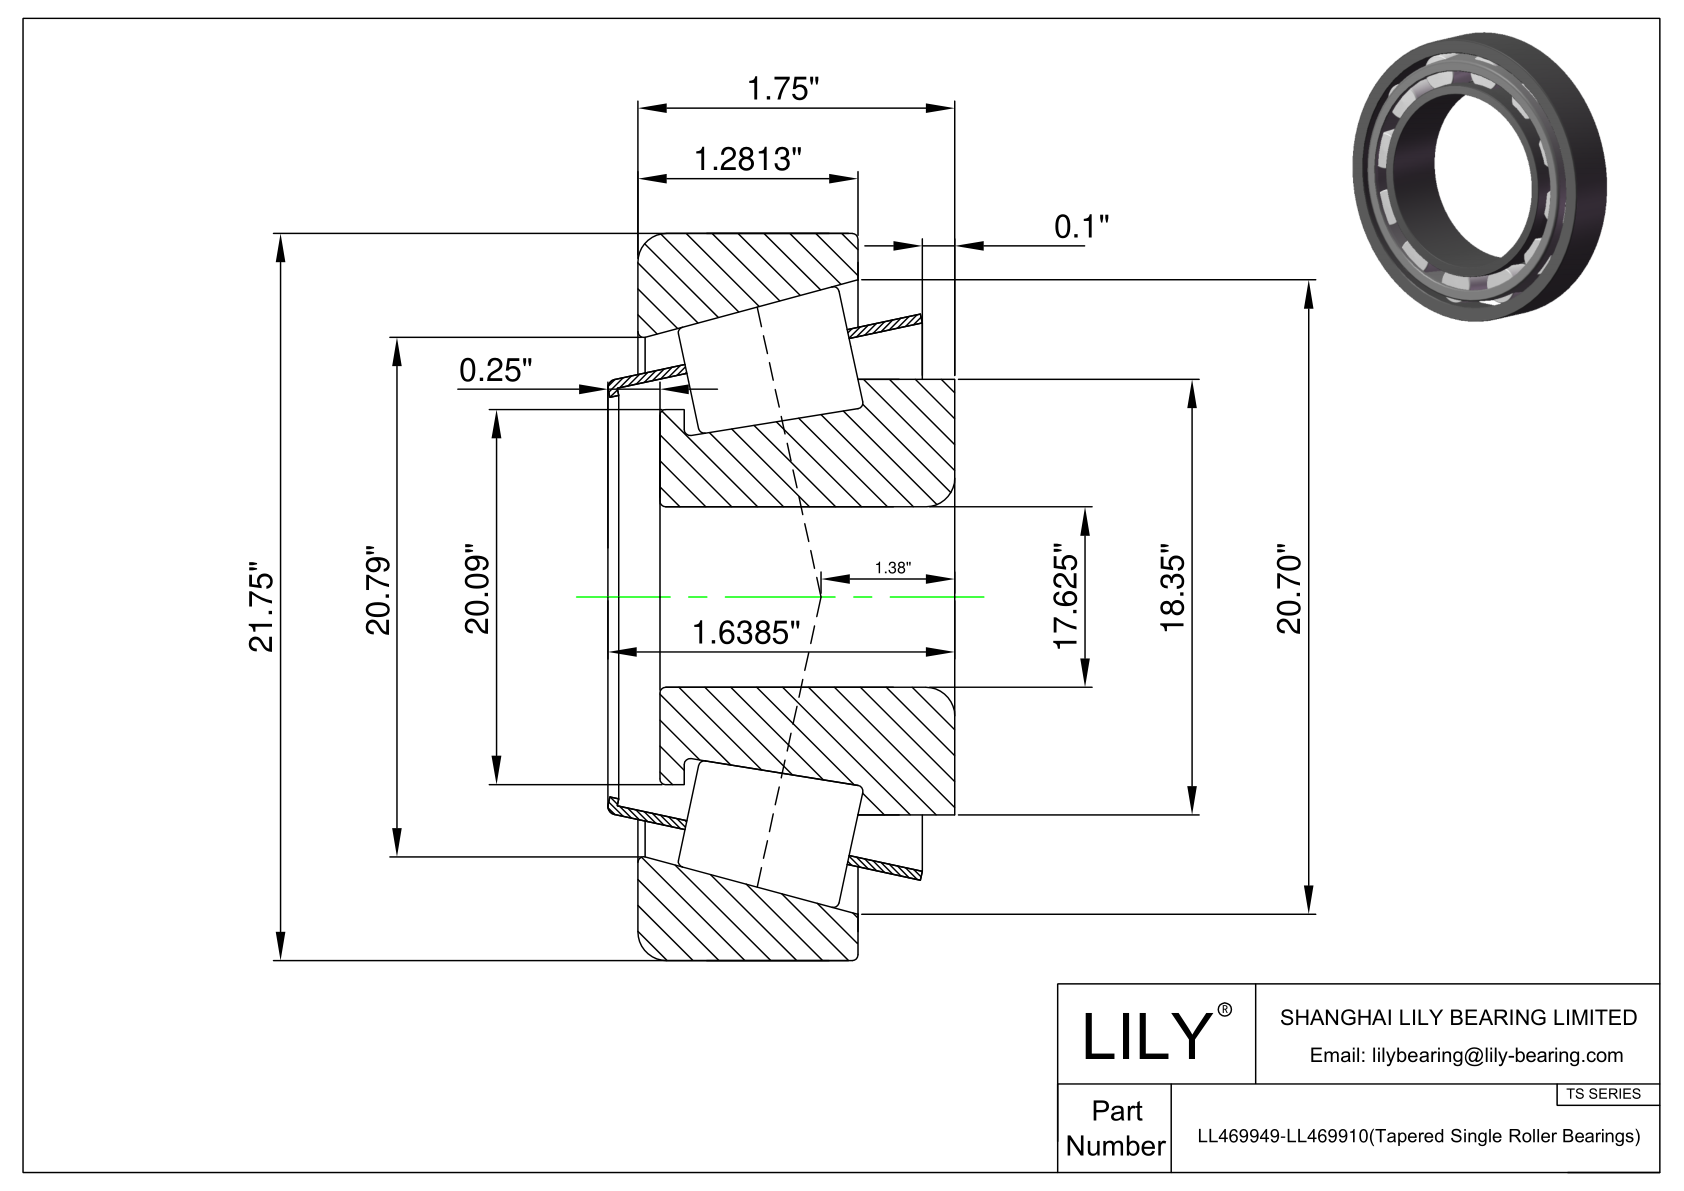 LL469949-LL469910 TS (Tapered Single Roller Bearings) (Imperial) cad drawing